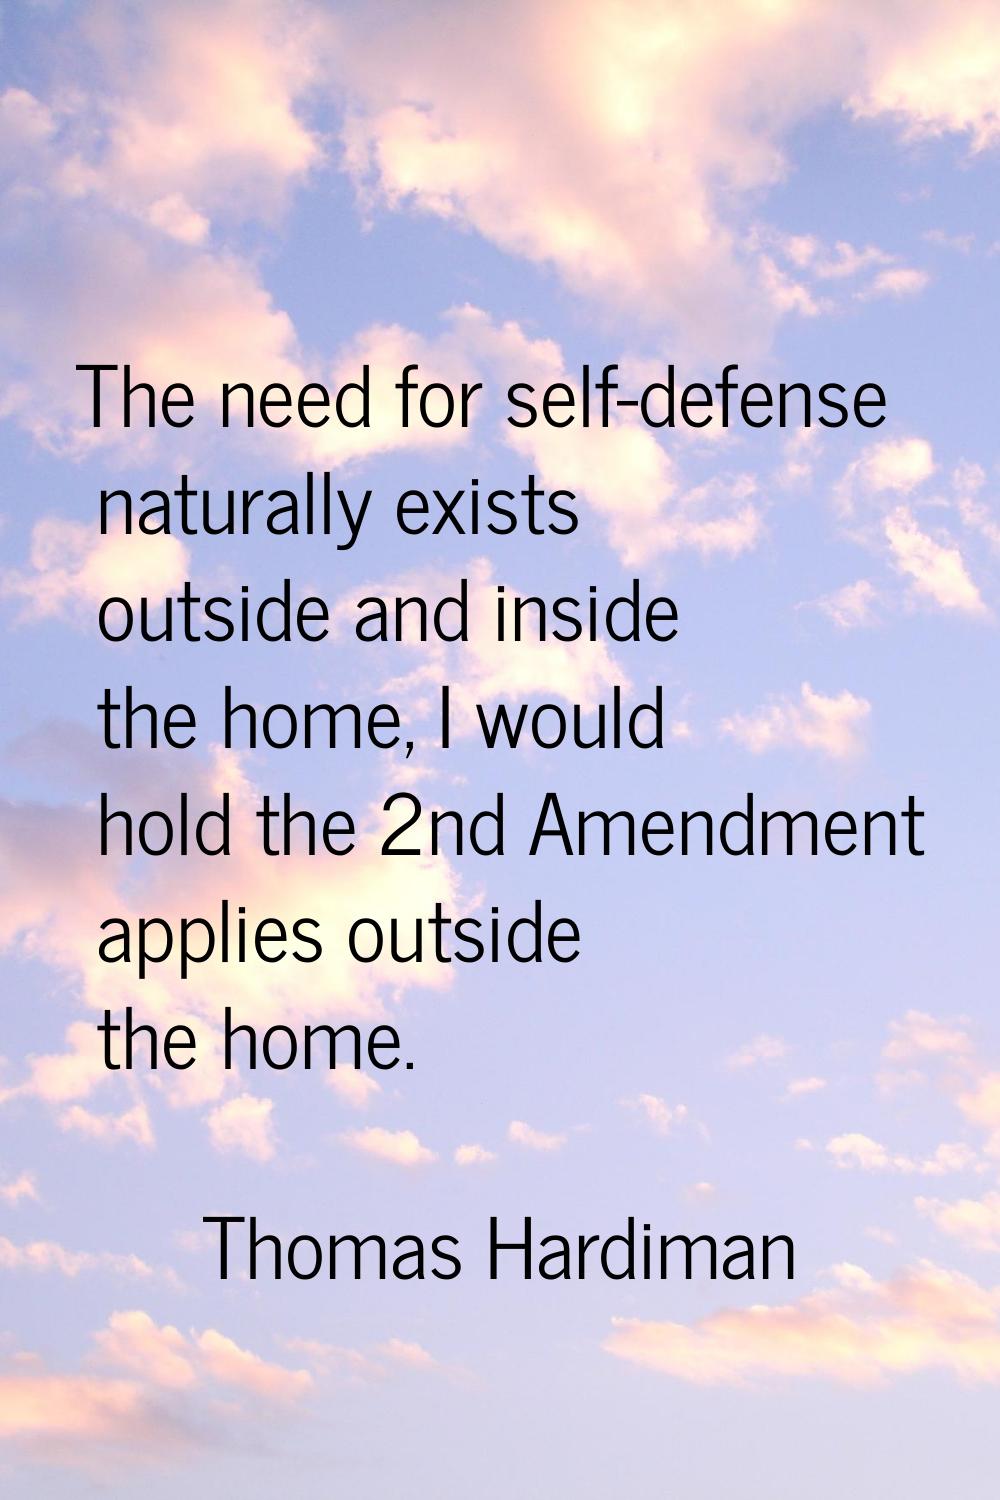 The need for self-defense naturally exists outside and inside the home, I would hold the 2nd Amendm